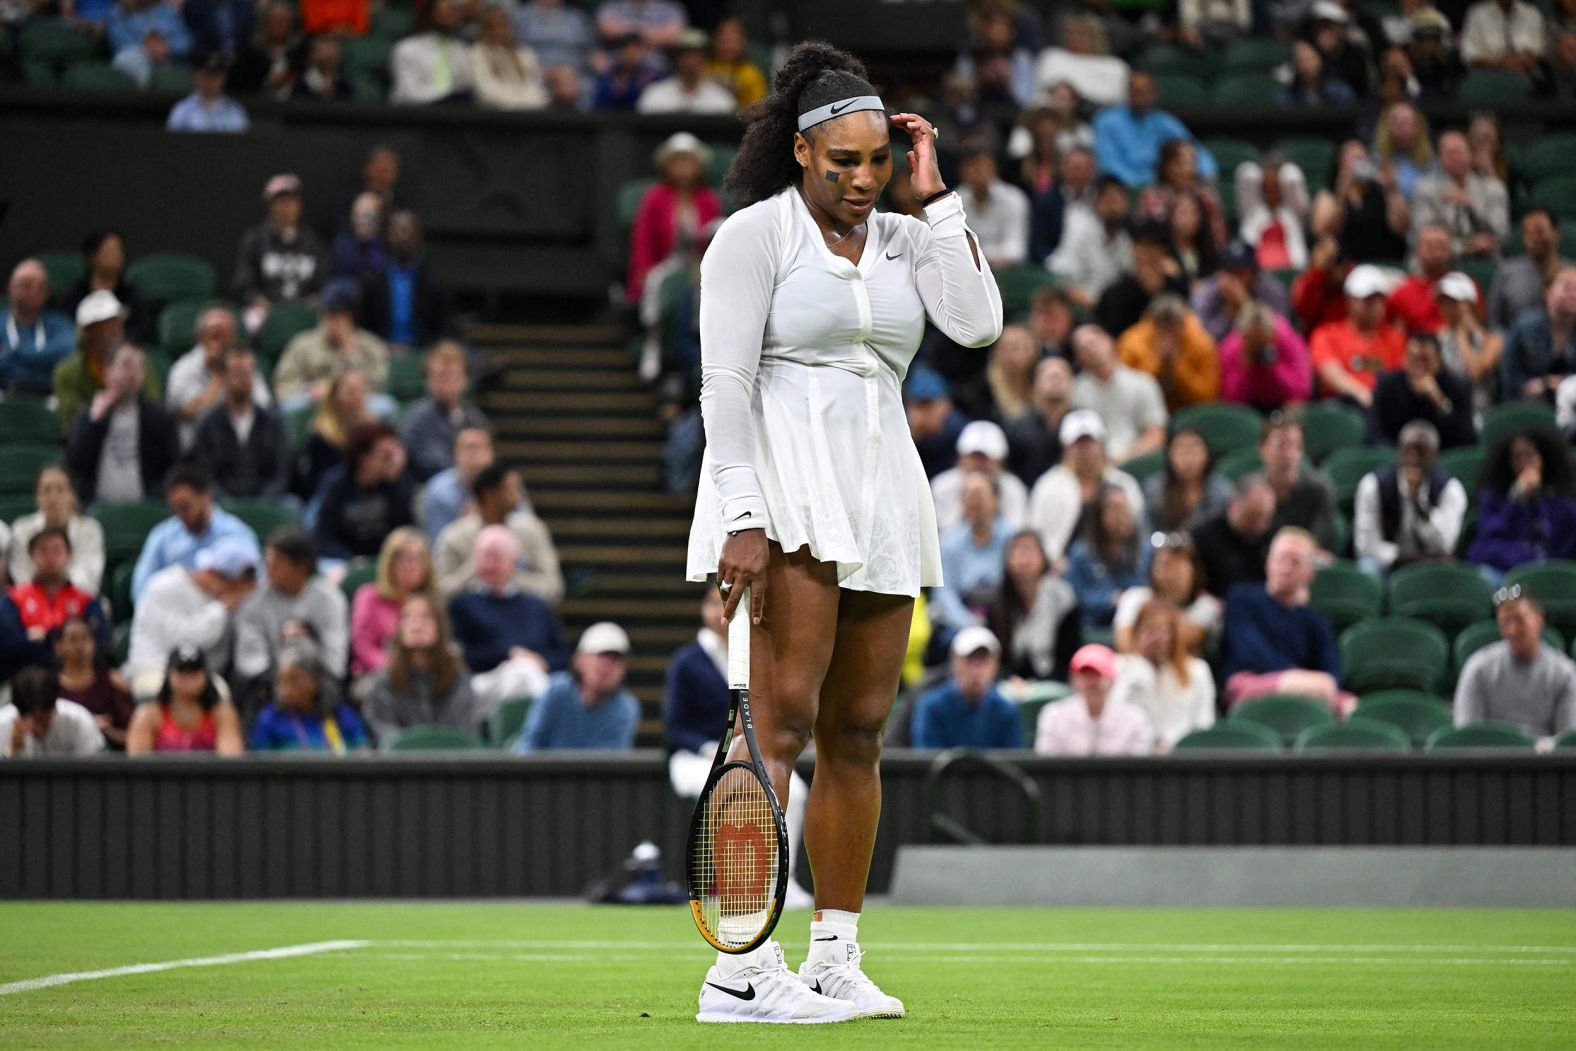 Serena Williams reacts during <a href="https://www.cnn.com/2022/06/28/tennis/serena-williams-harmony-tan-wimbledon-spt-intl/index.html" target="_blank">her first-round Wimbledon loss</a> to Harmony Tan on Tuesday, June 28. It was her first singles match after a yearlong absence. When Williams was later asked if it was the final Wimbledon match of her decorated career, she said it was a question she "can't answer."